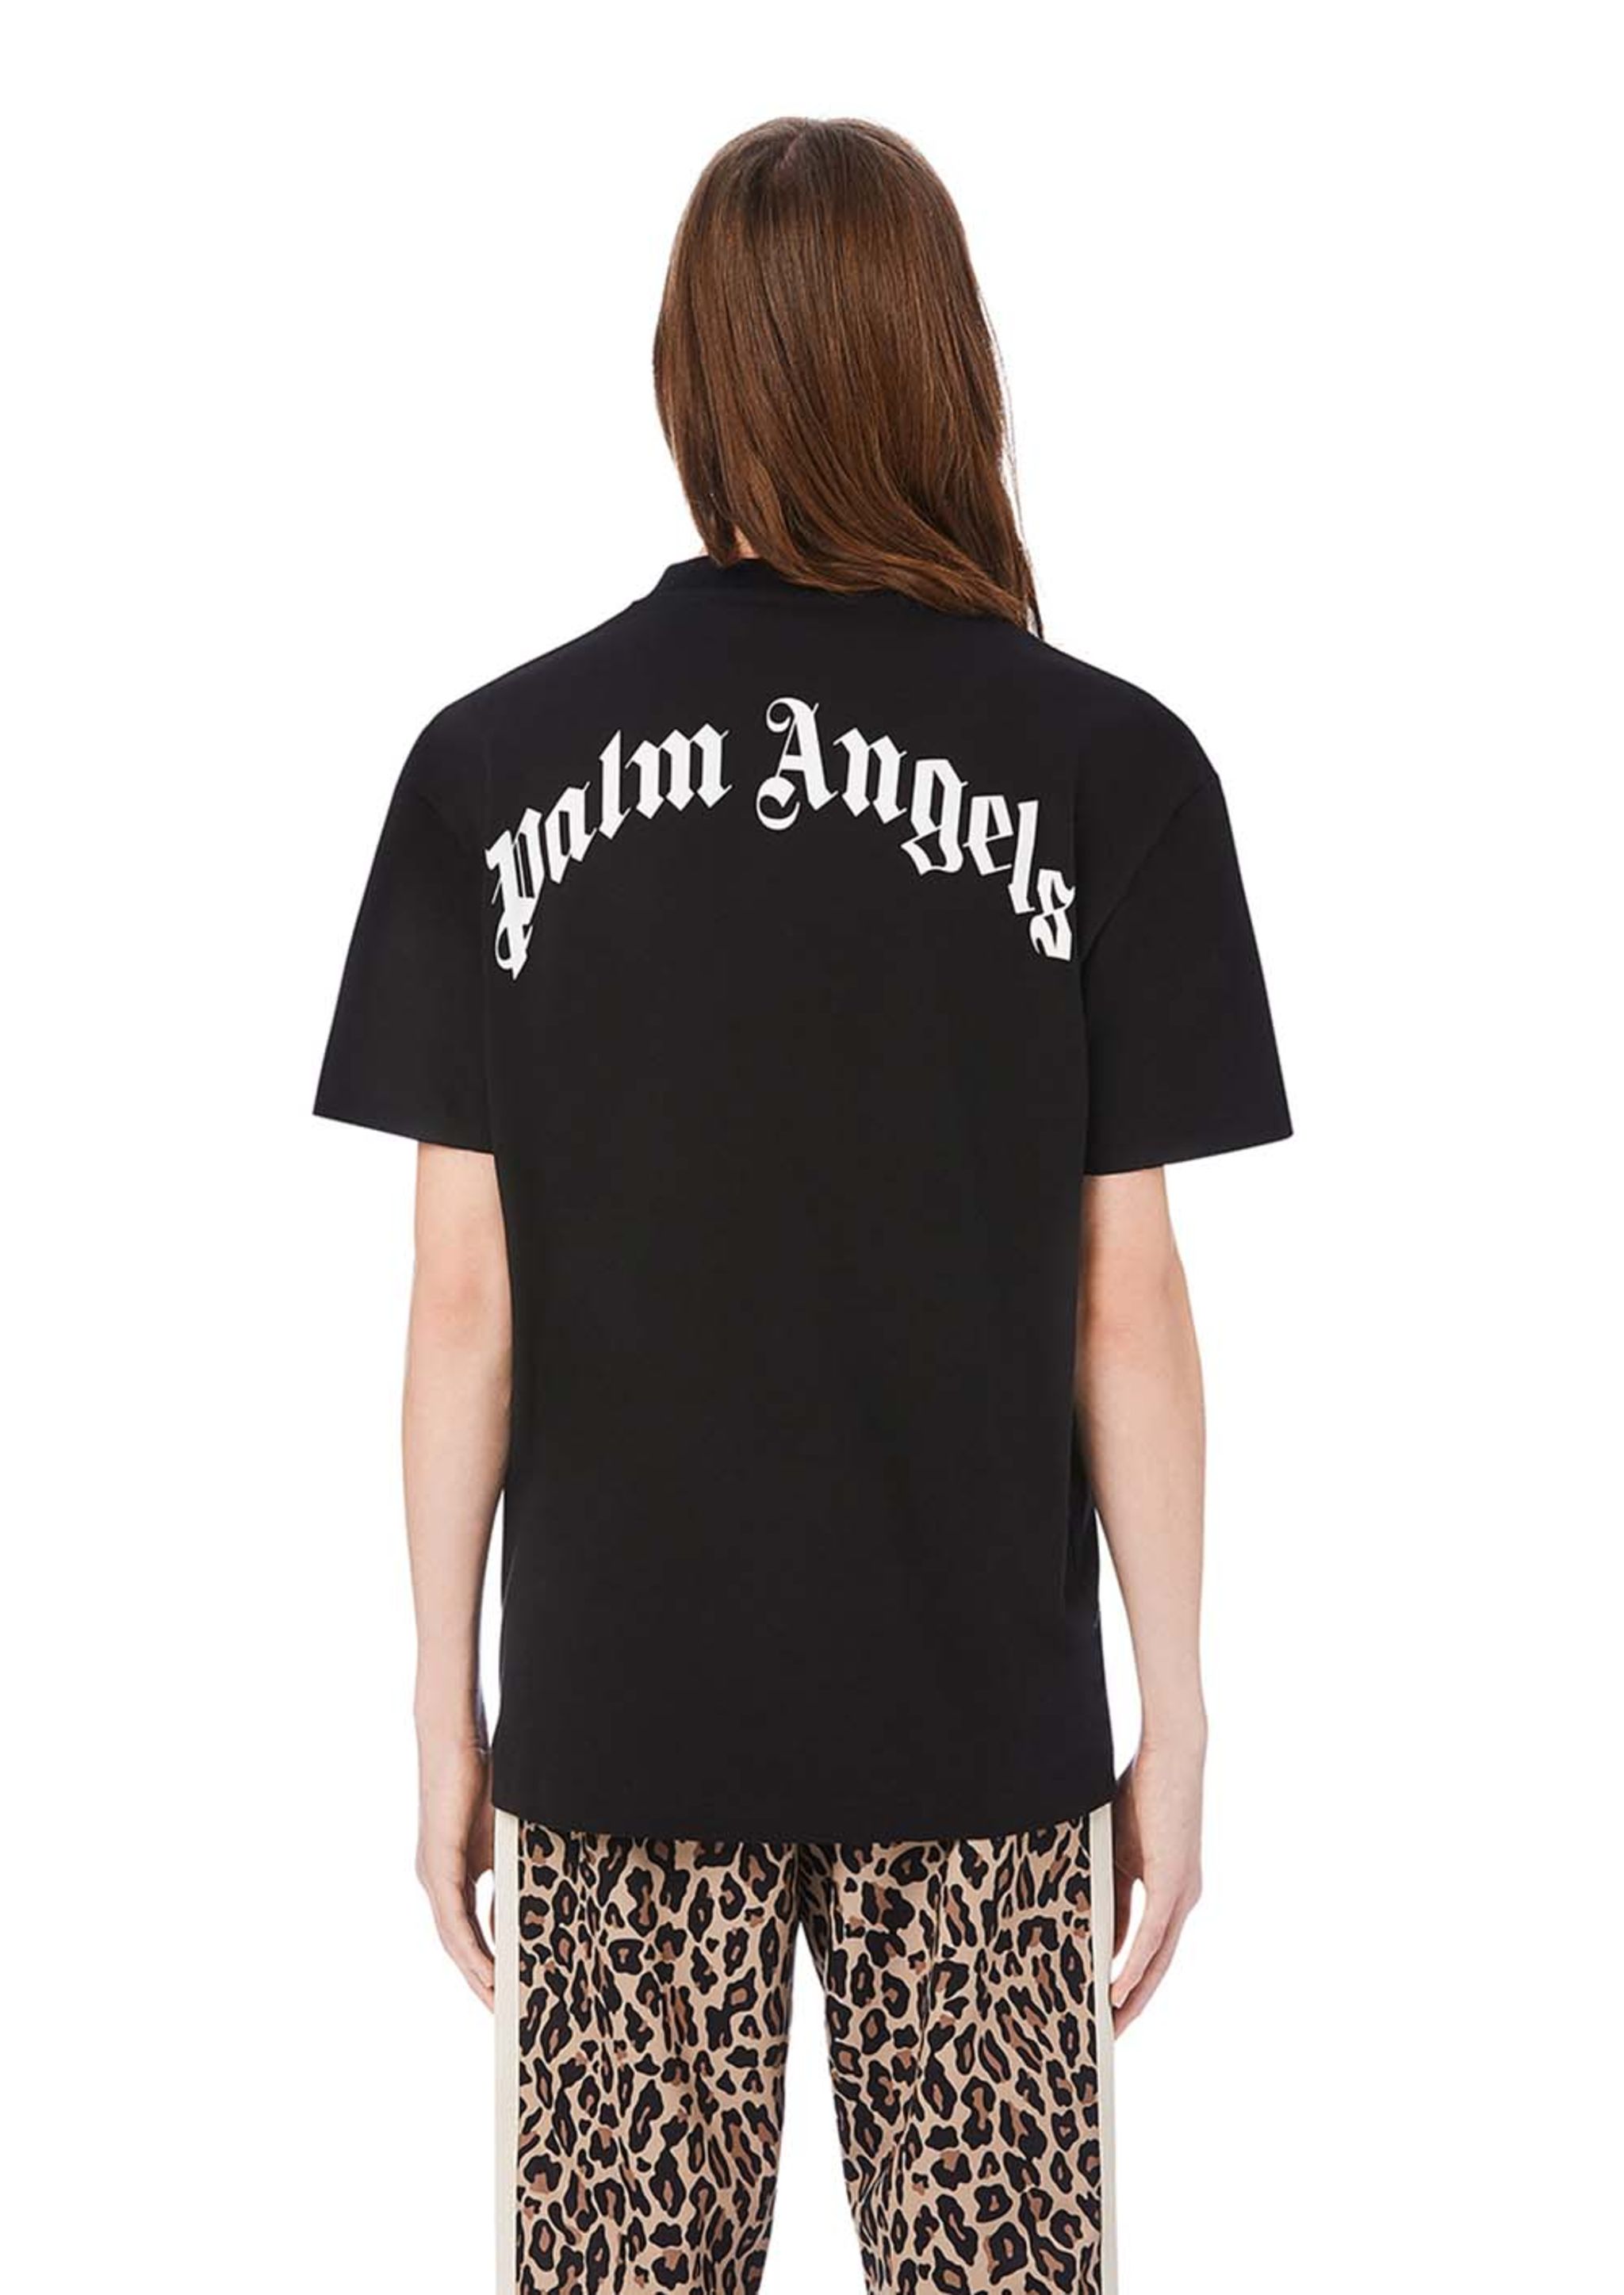 Palm Angels T-shirt – SNW